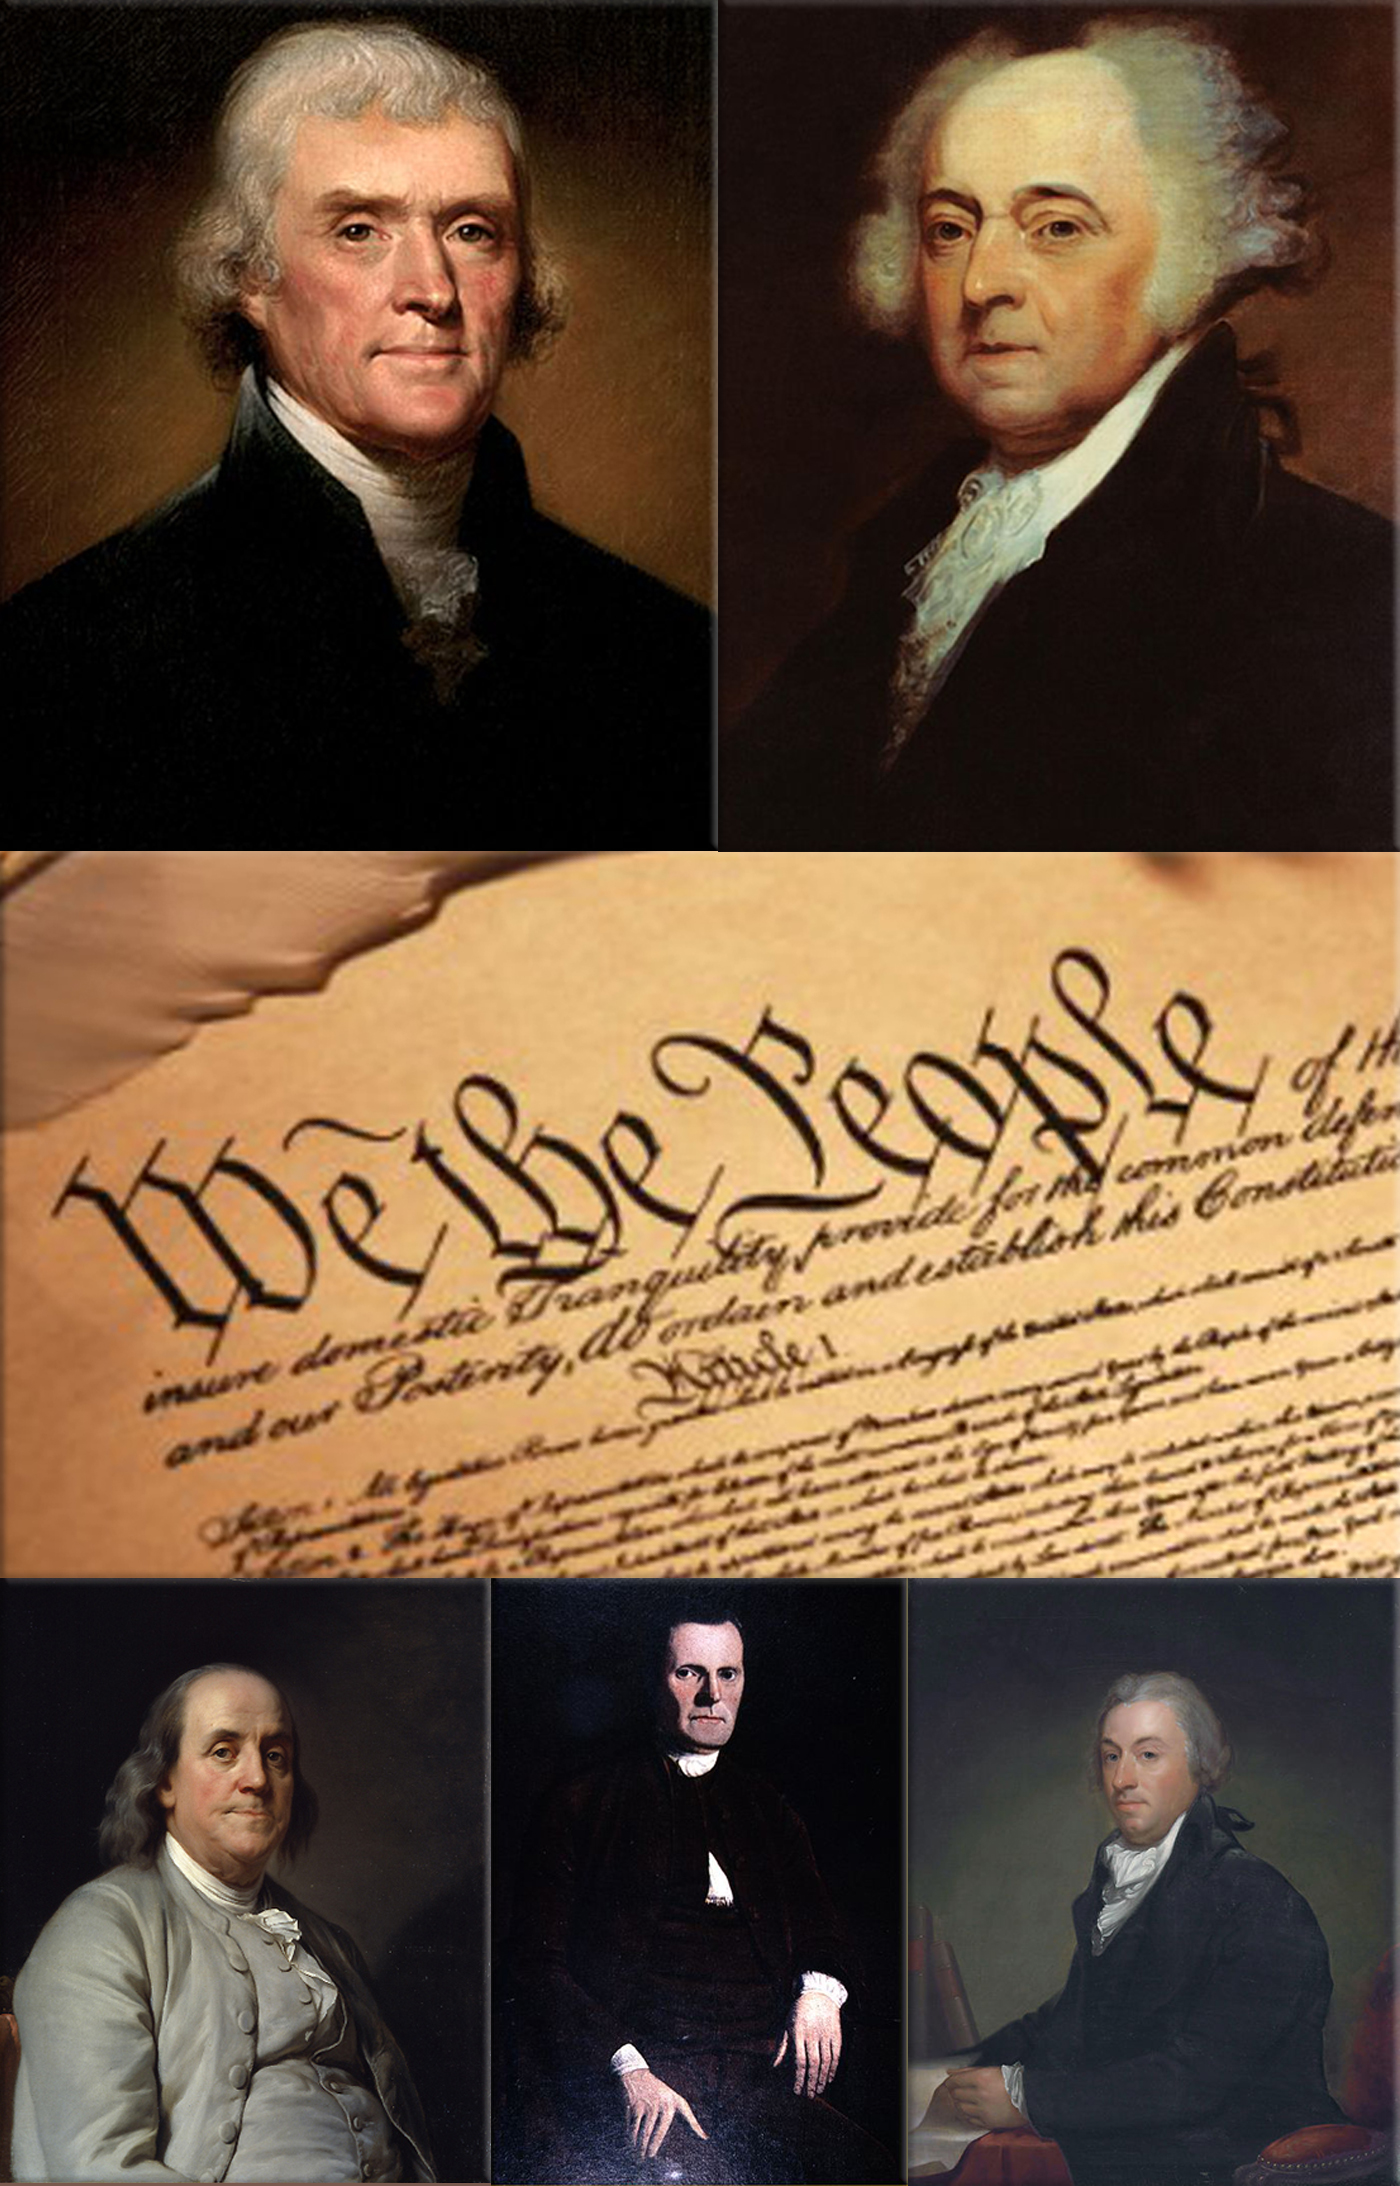 The Continental Congress appoints Thomas Jefferson, John Adams, Benjamin Franklin, Roger Sherman, and Robert R. Livingston to the Committee of Five to draft a declaration of independence